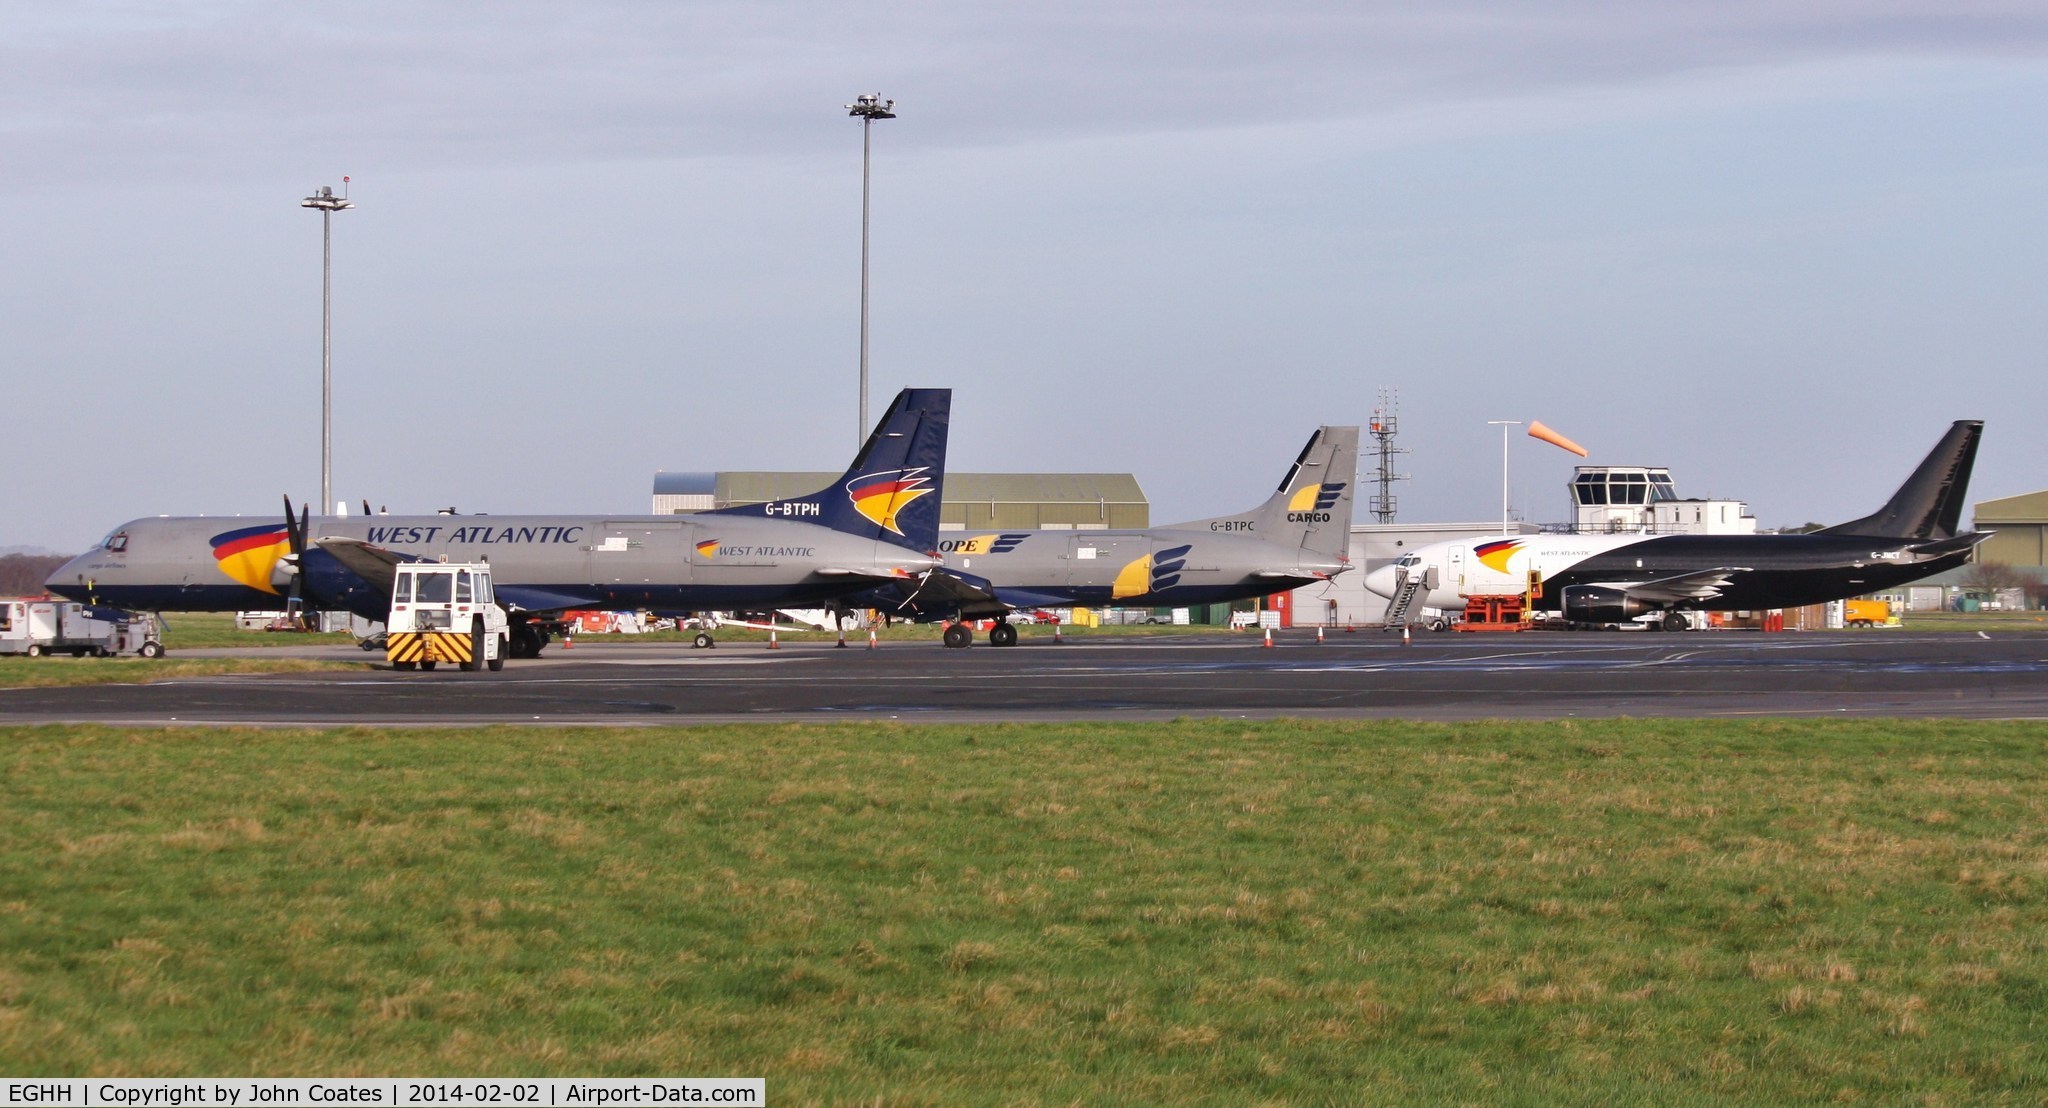 Bournemouth Airport, Bournemouth, England United Kingdom (EGHH) - Nice mixture on the cargo apron